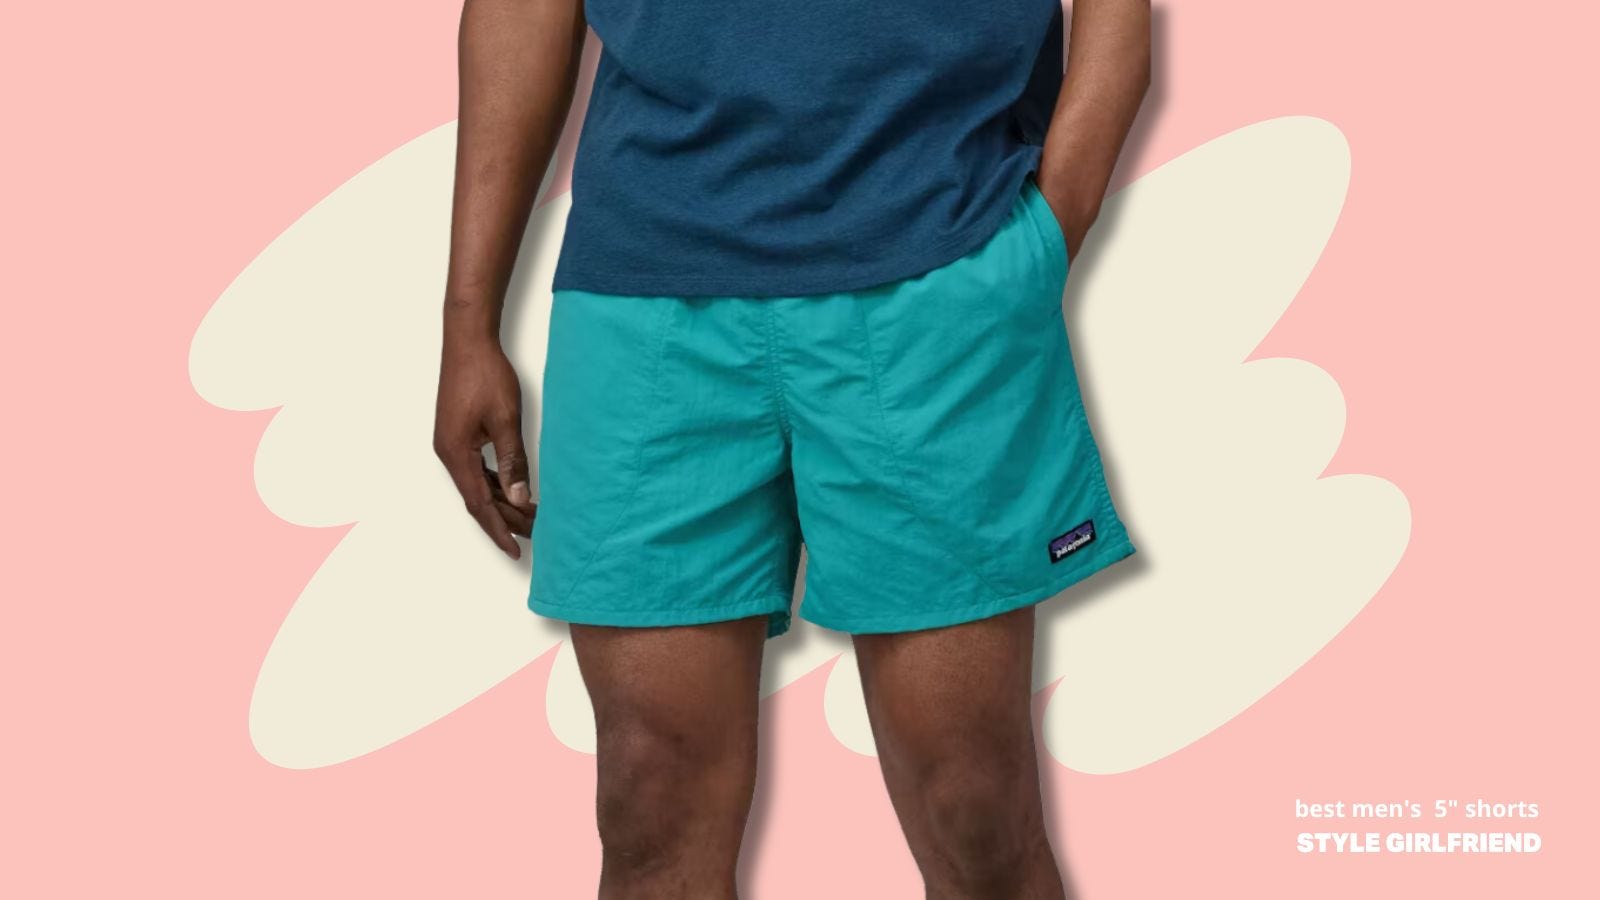 close-up image of a man's torso and upper legs, wearing a blue t-shirt and turquoise nylon shorts 